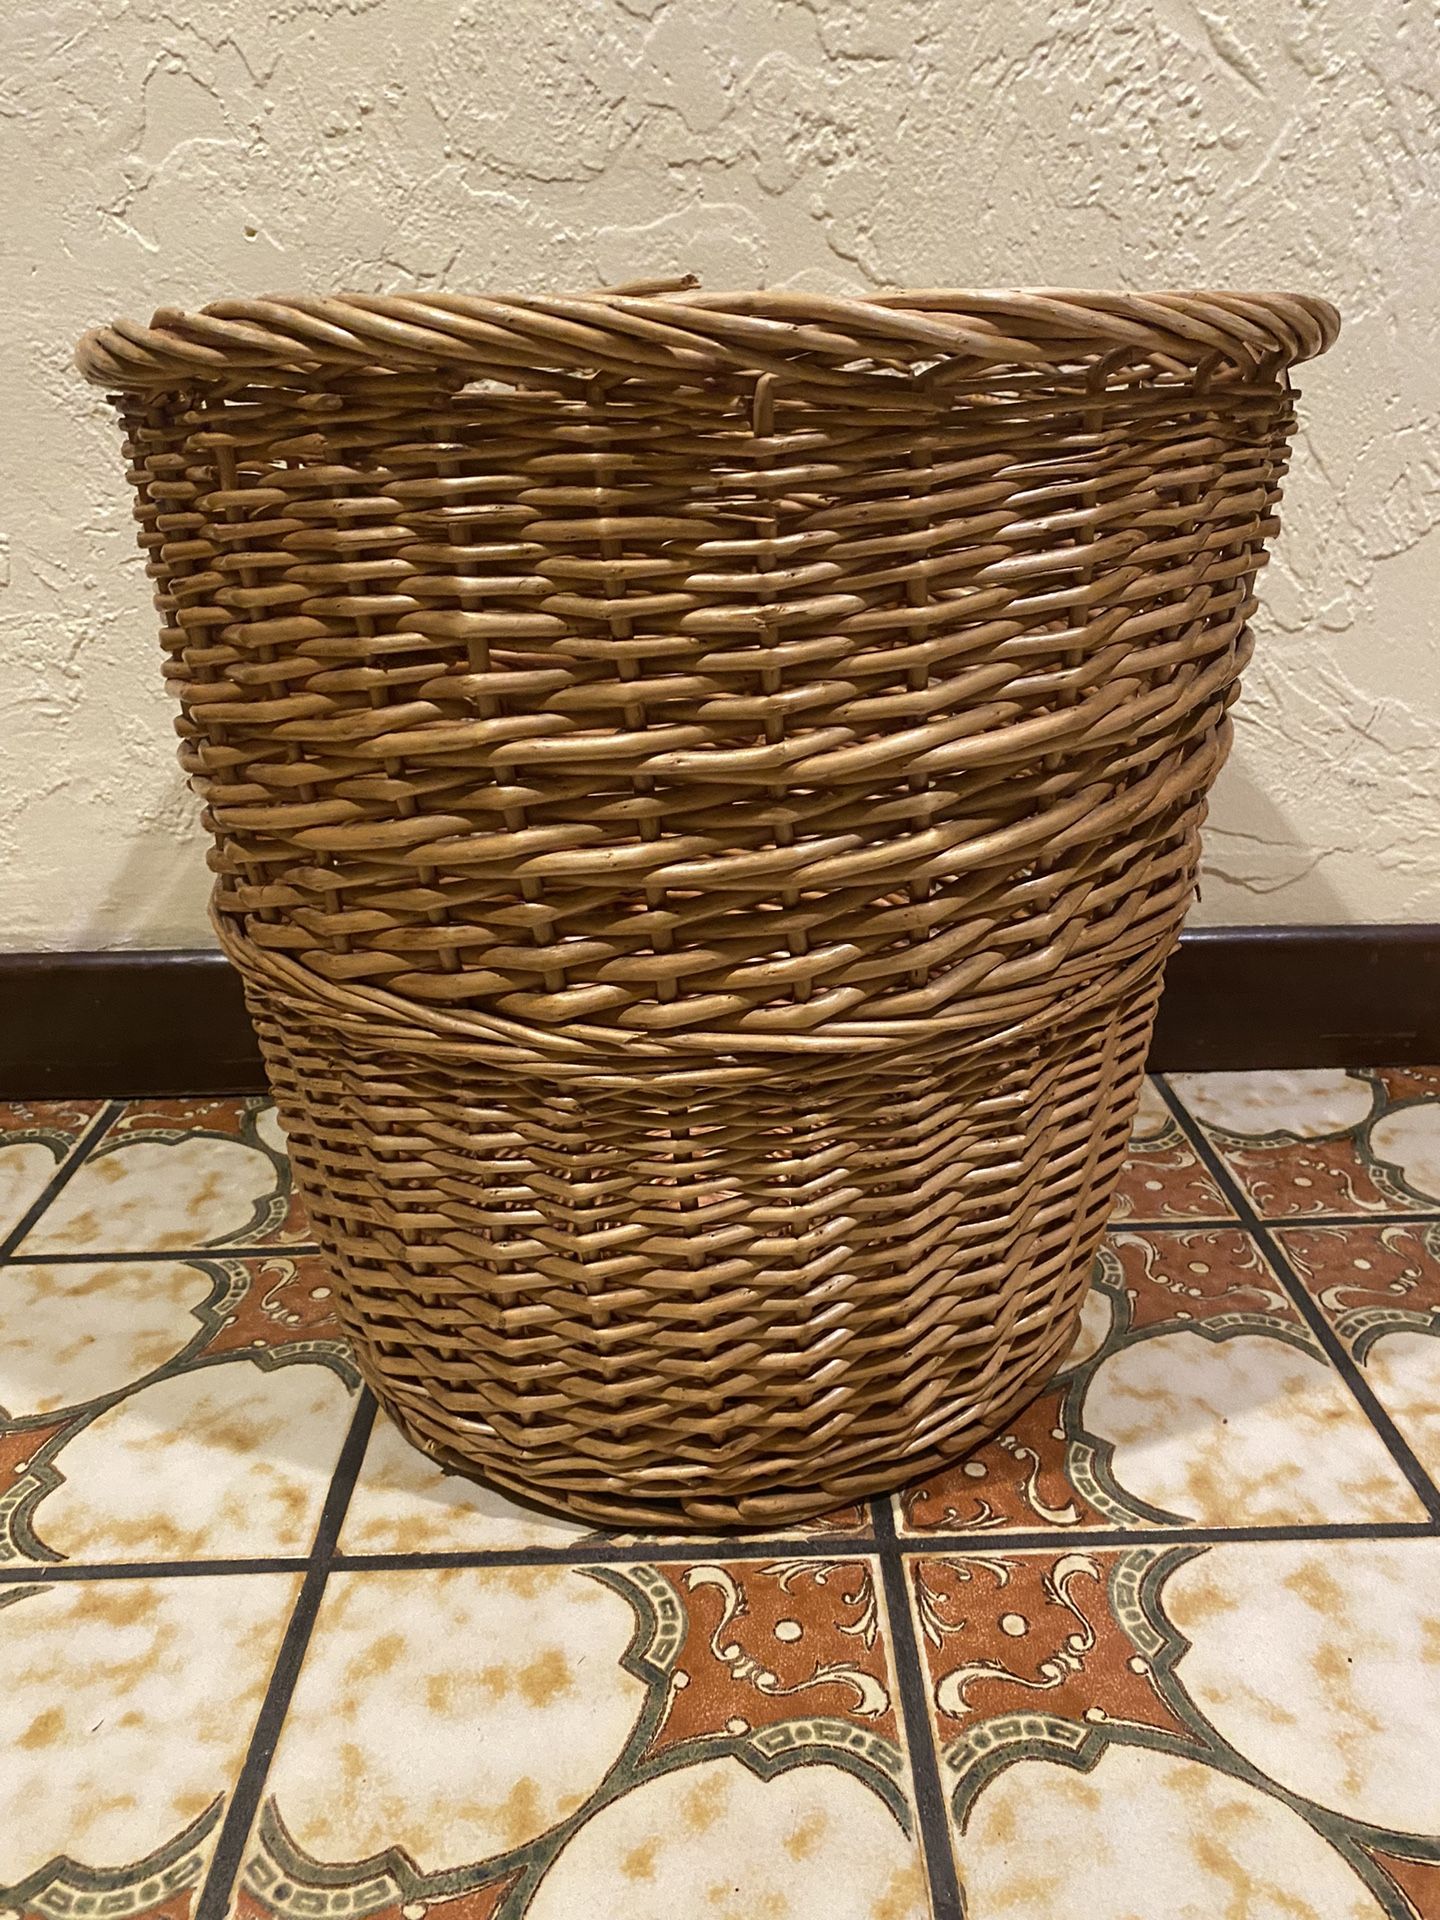 Wicker Big Basket For Laundry, Toys, Blankets, Plants